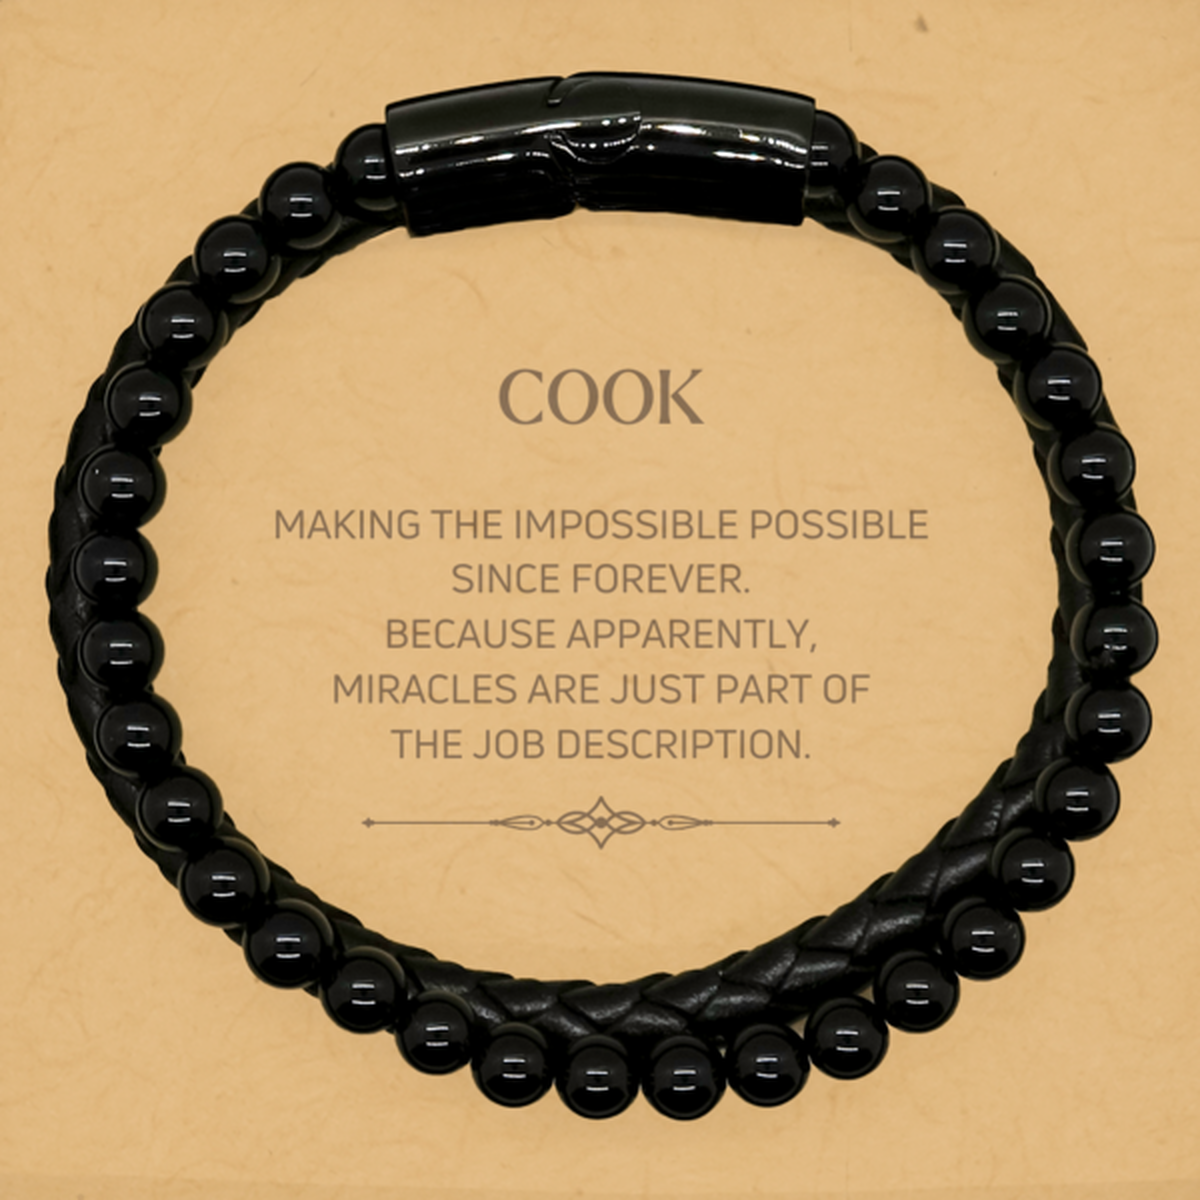 Funny Cook Gifts, Miracles are just part of the job description, Inspirational Birthday Stone Leather Bracelets For Cook, Men, Women, Coworkers, Friends, Boss